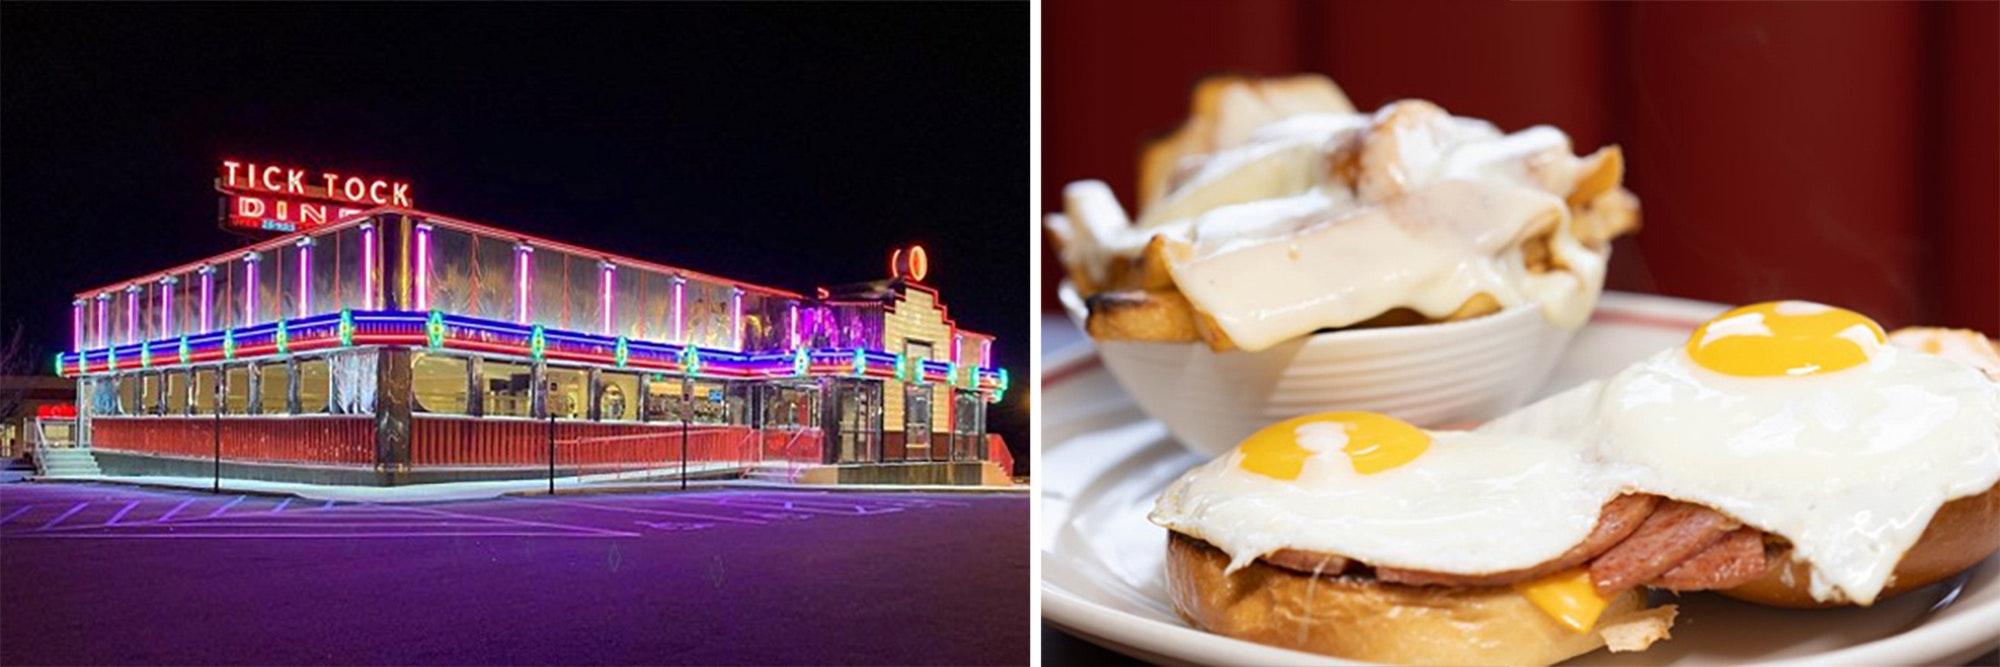 Left: The exterior of Tick Tock Diner. Right: A breakfast entree